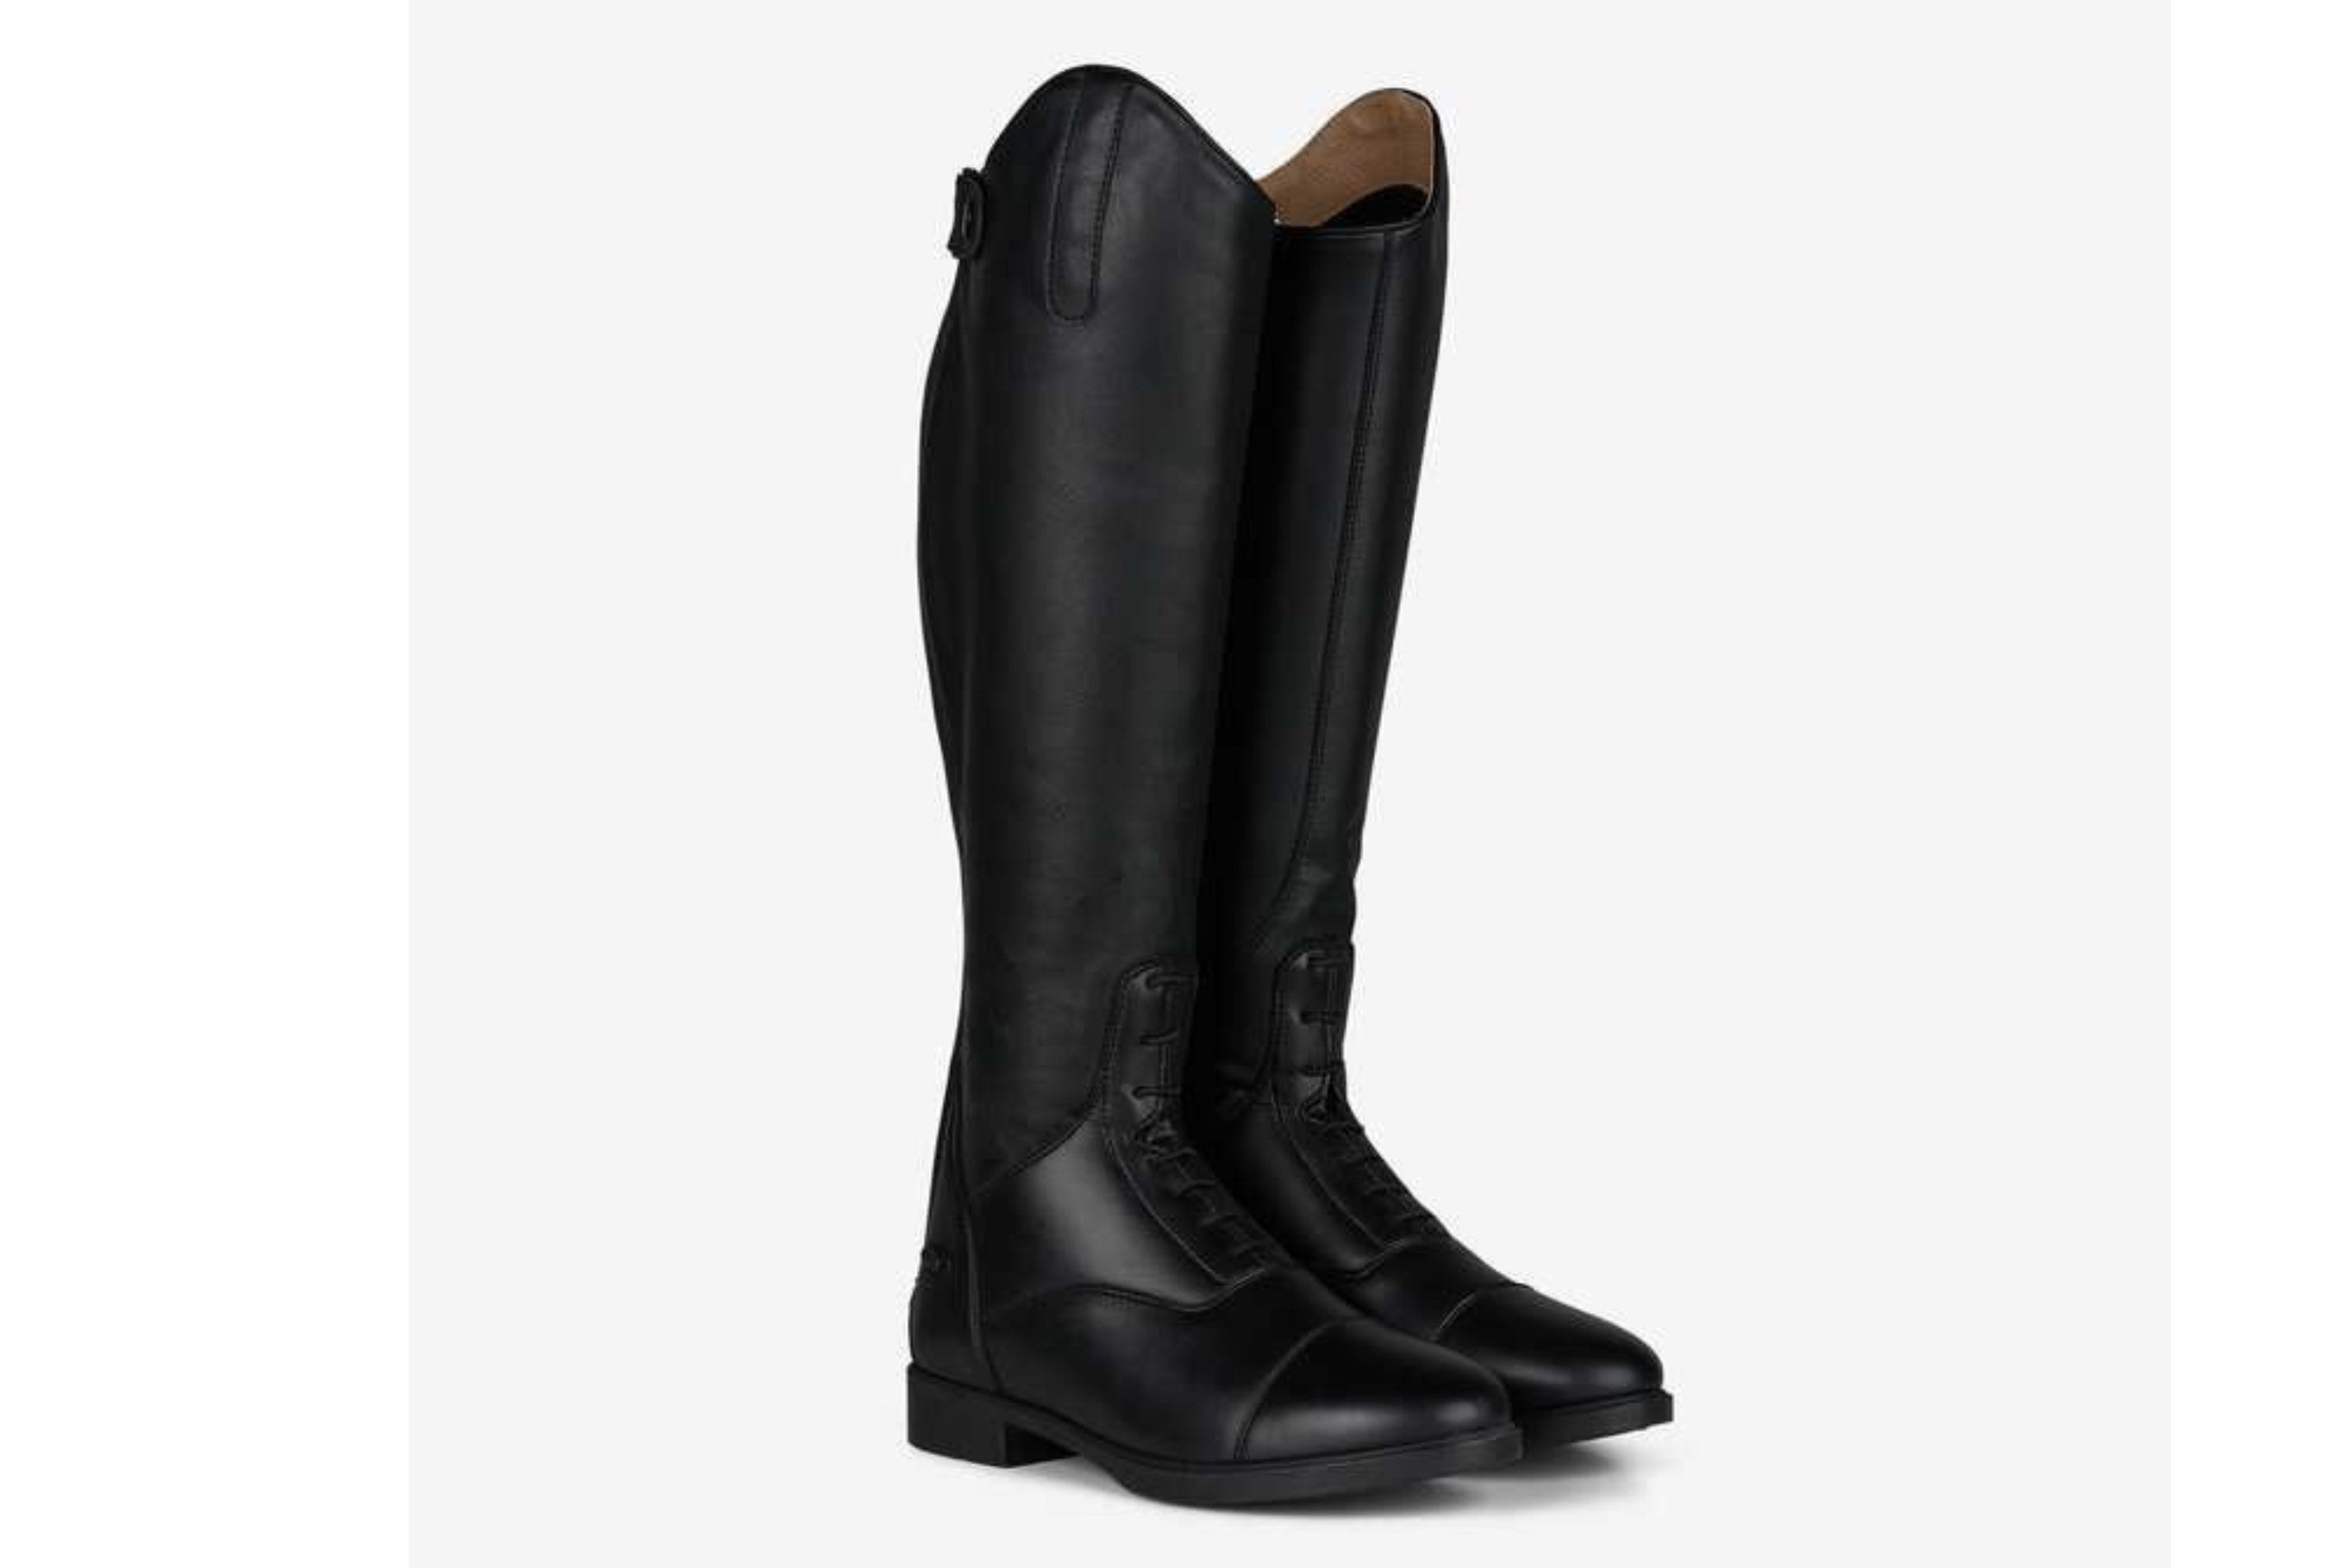 HZ Rover Field Tall Boots - STOCK DUE EARLY APRIL